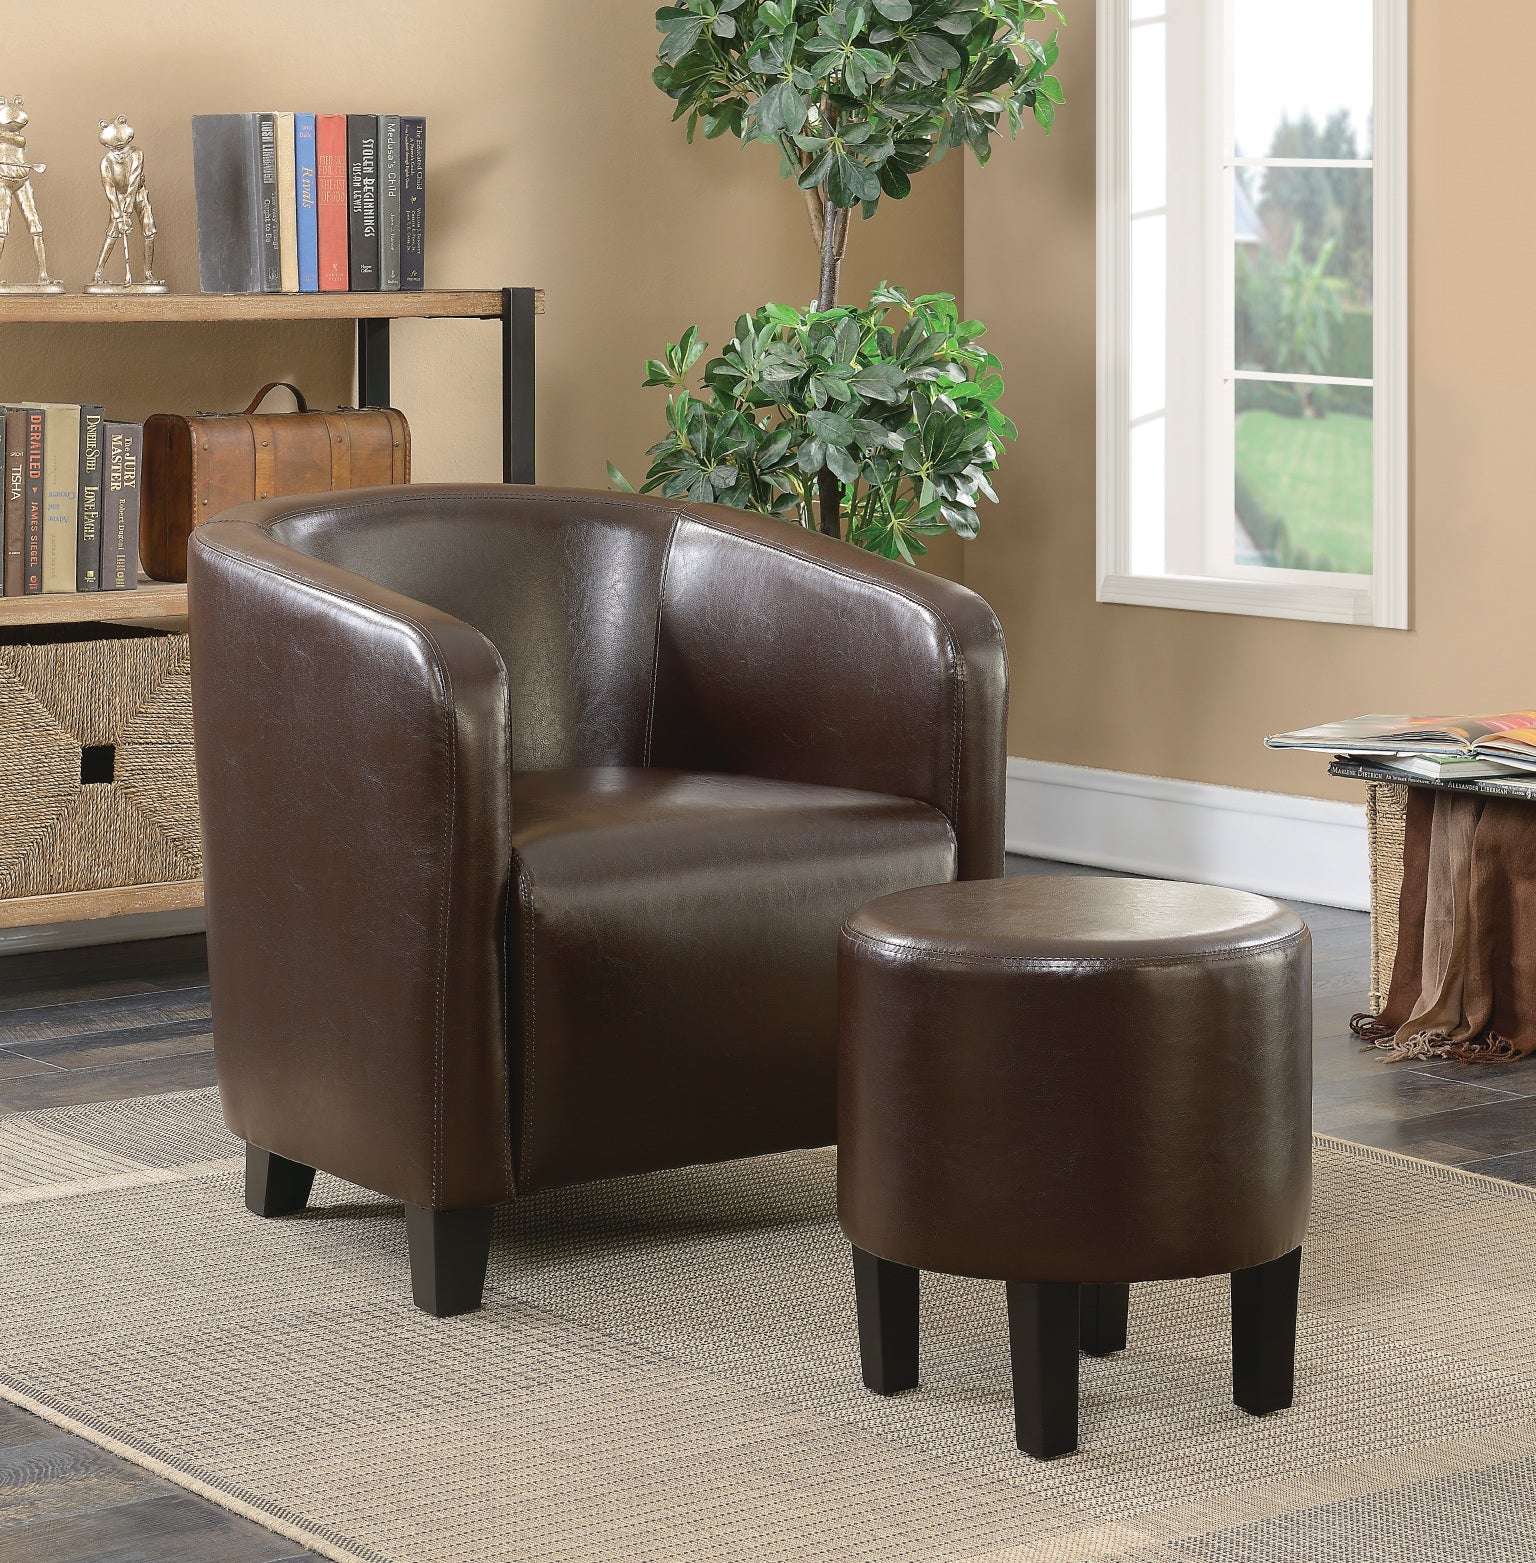 AC472 - Accent Chair with Ottoman